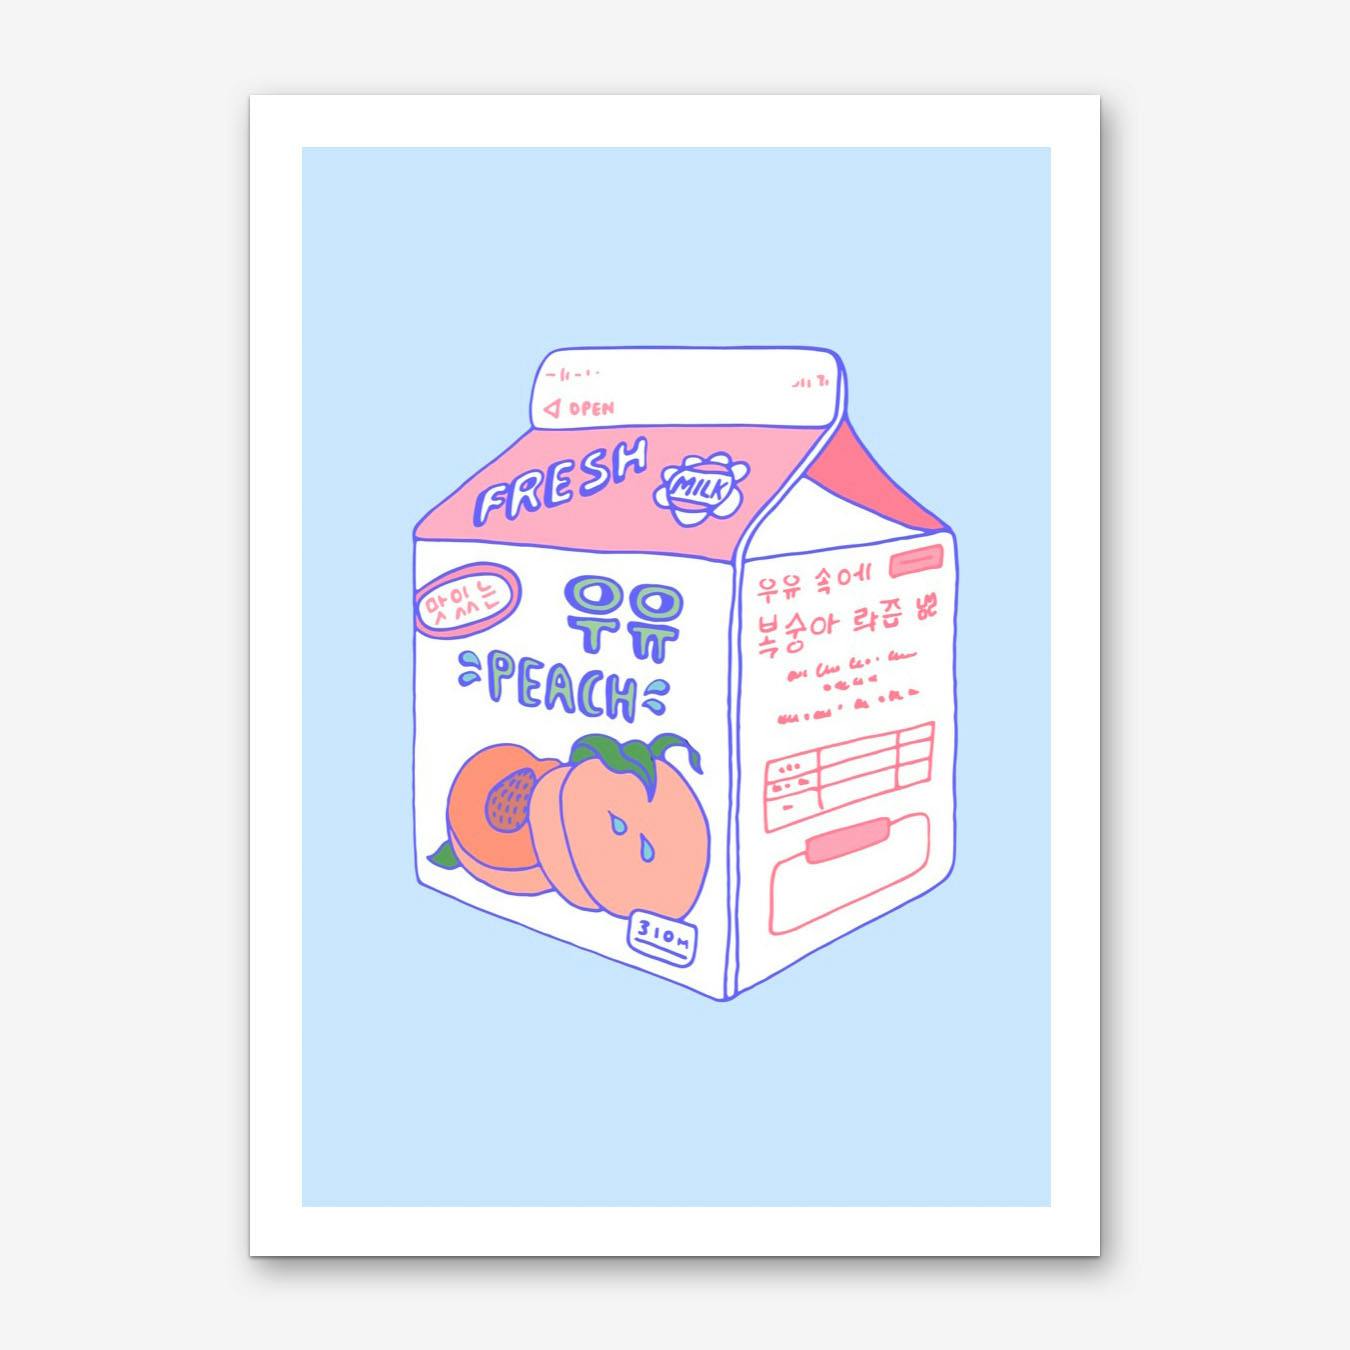 How to Draw a Milk Carton Step by Step - EasyDrawingTips